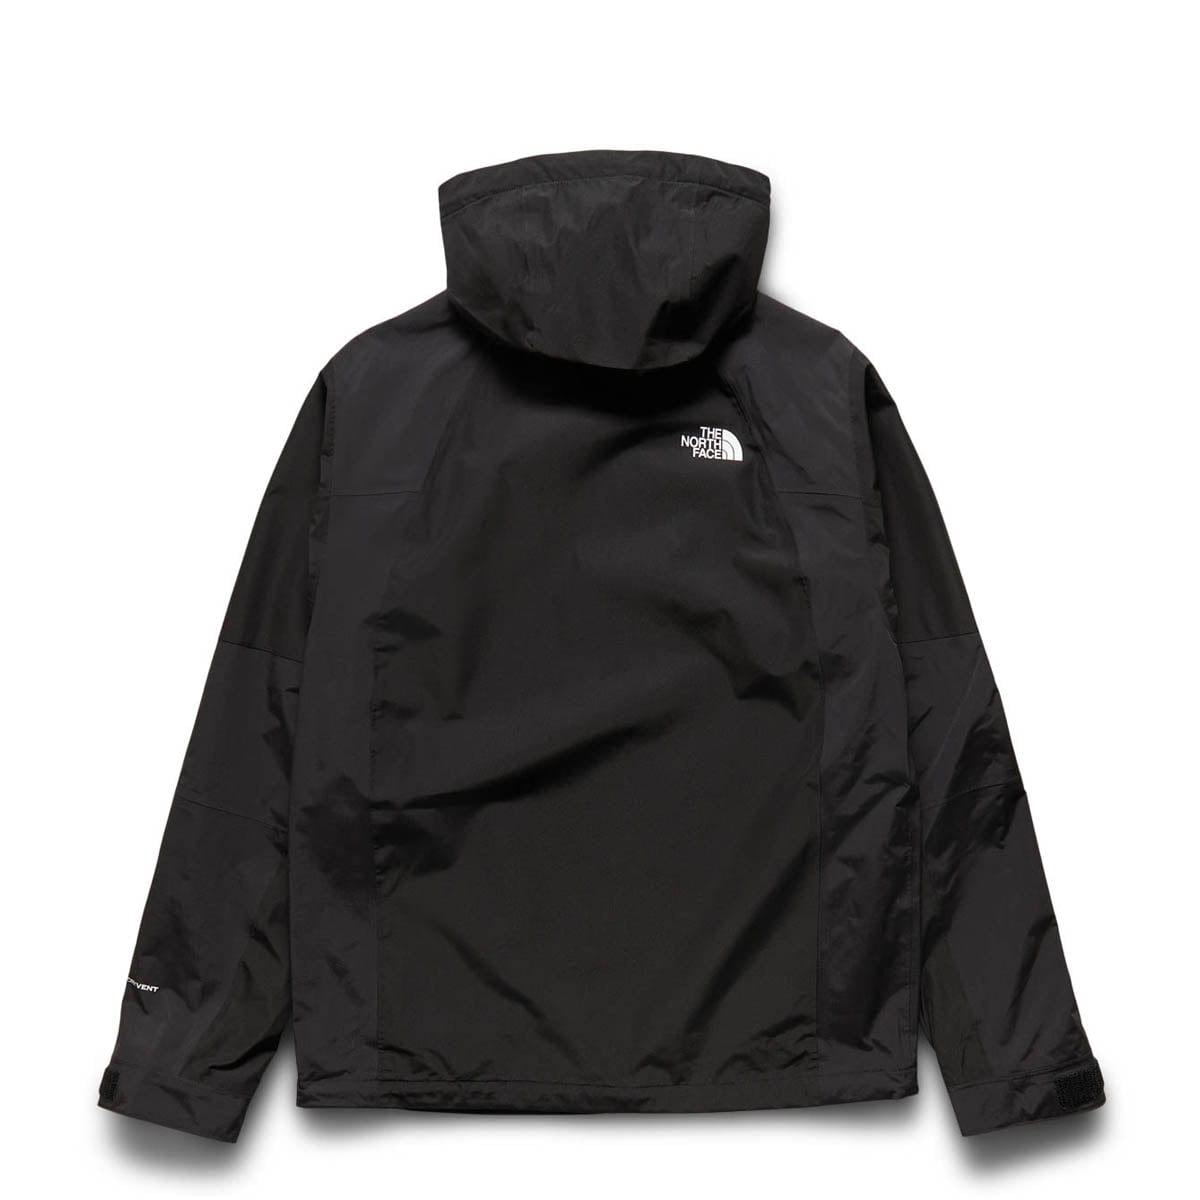 The North Face Outerwear 2000 MOUNTAIN JACKET